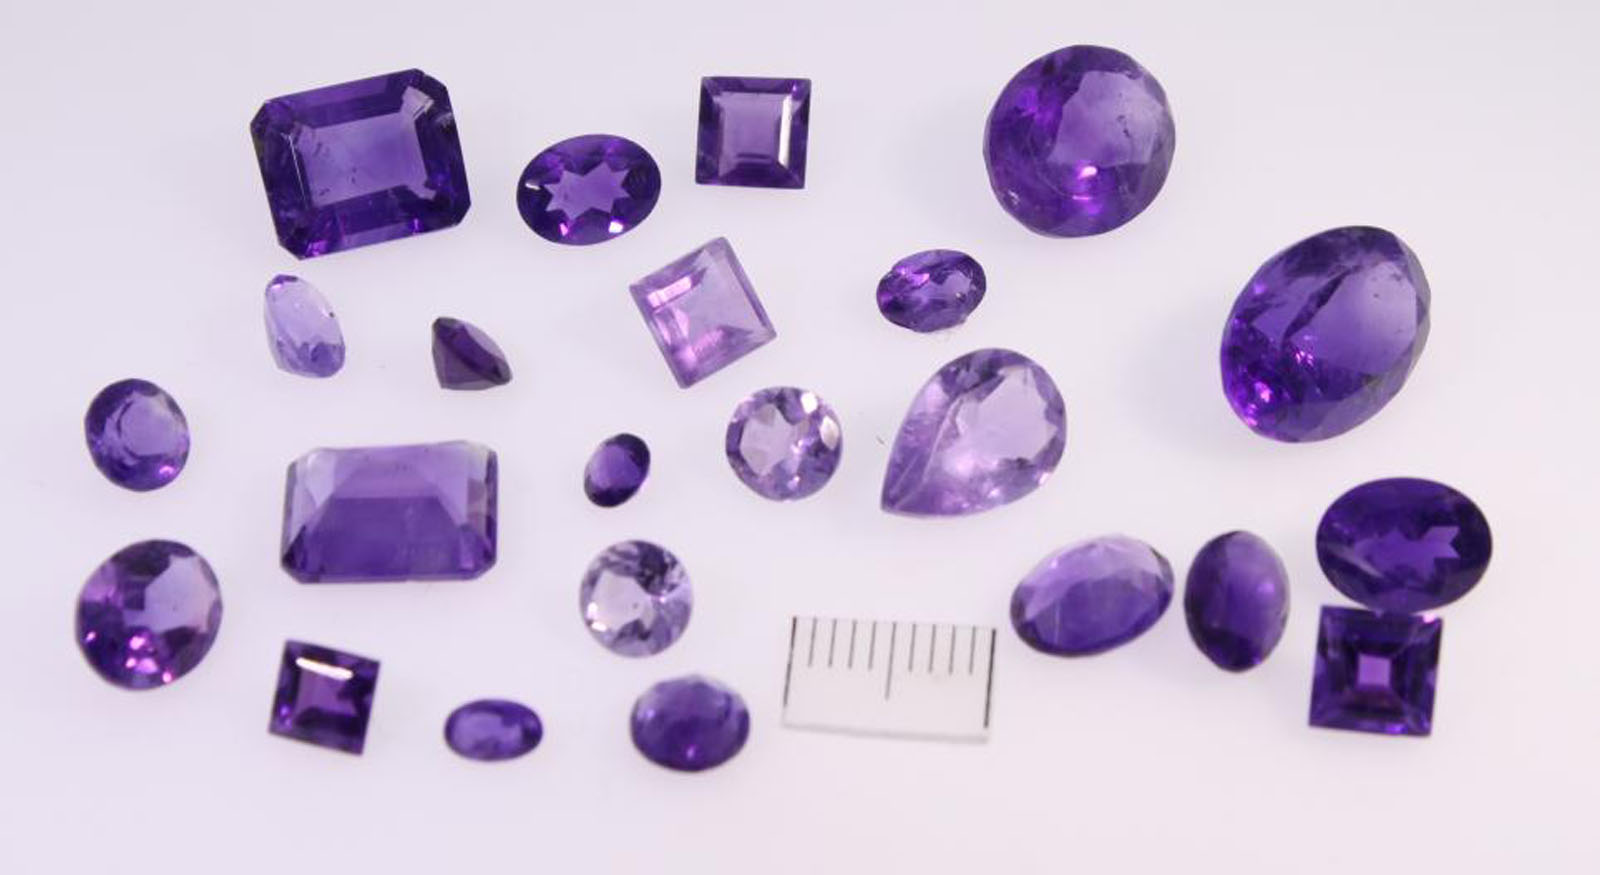 Amethyst faceted cut - Jewelry stones